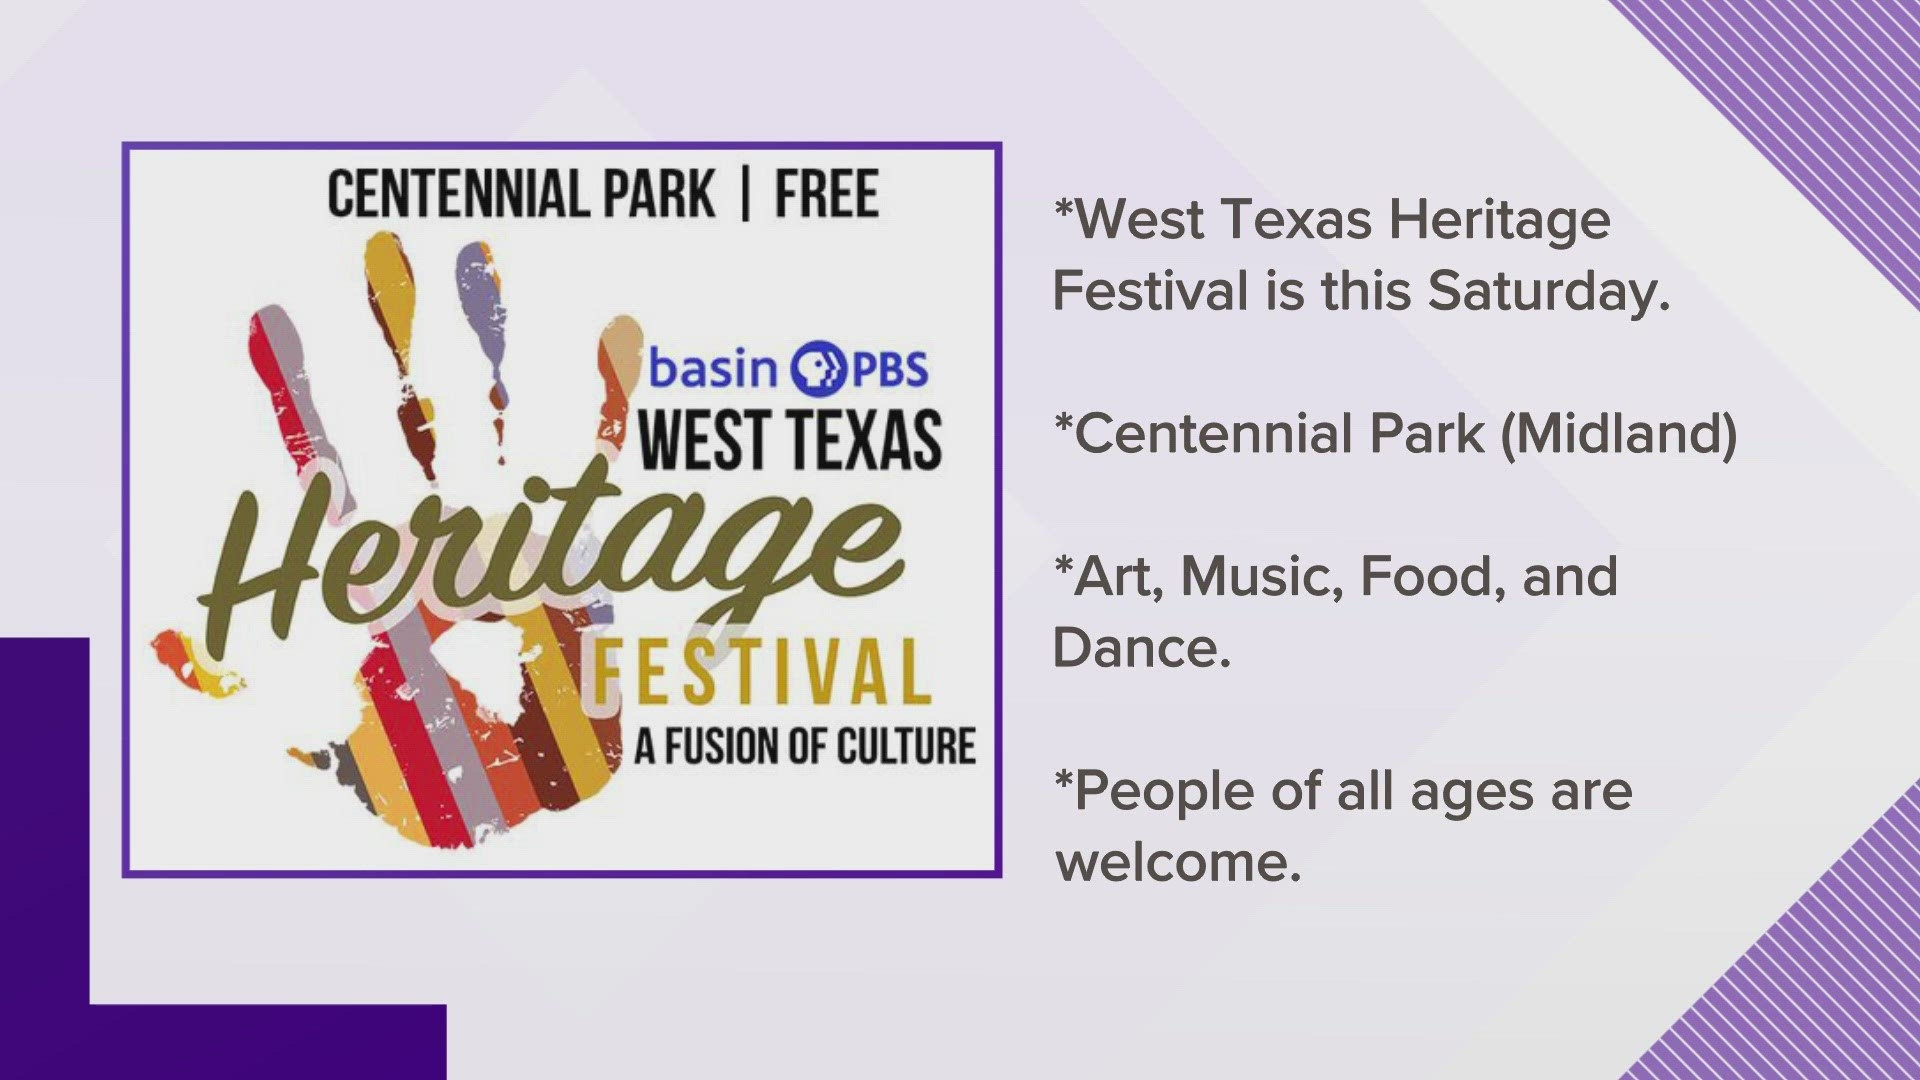 The festival will be in Midland at Centennial Park and there will be art, music, food and dance.